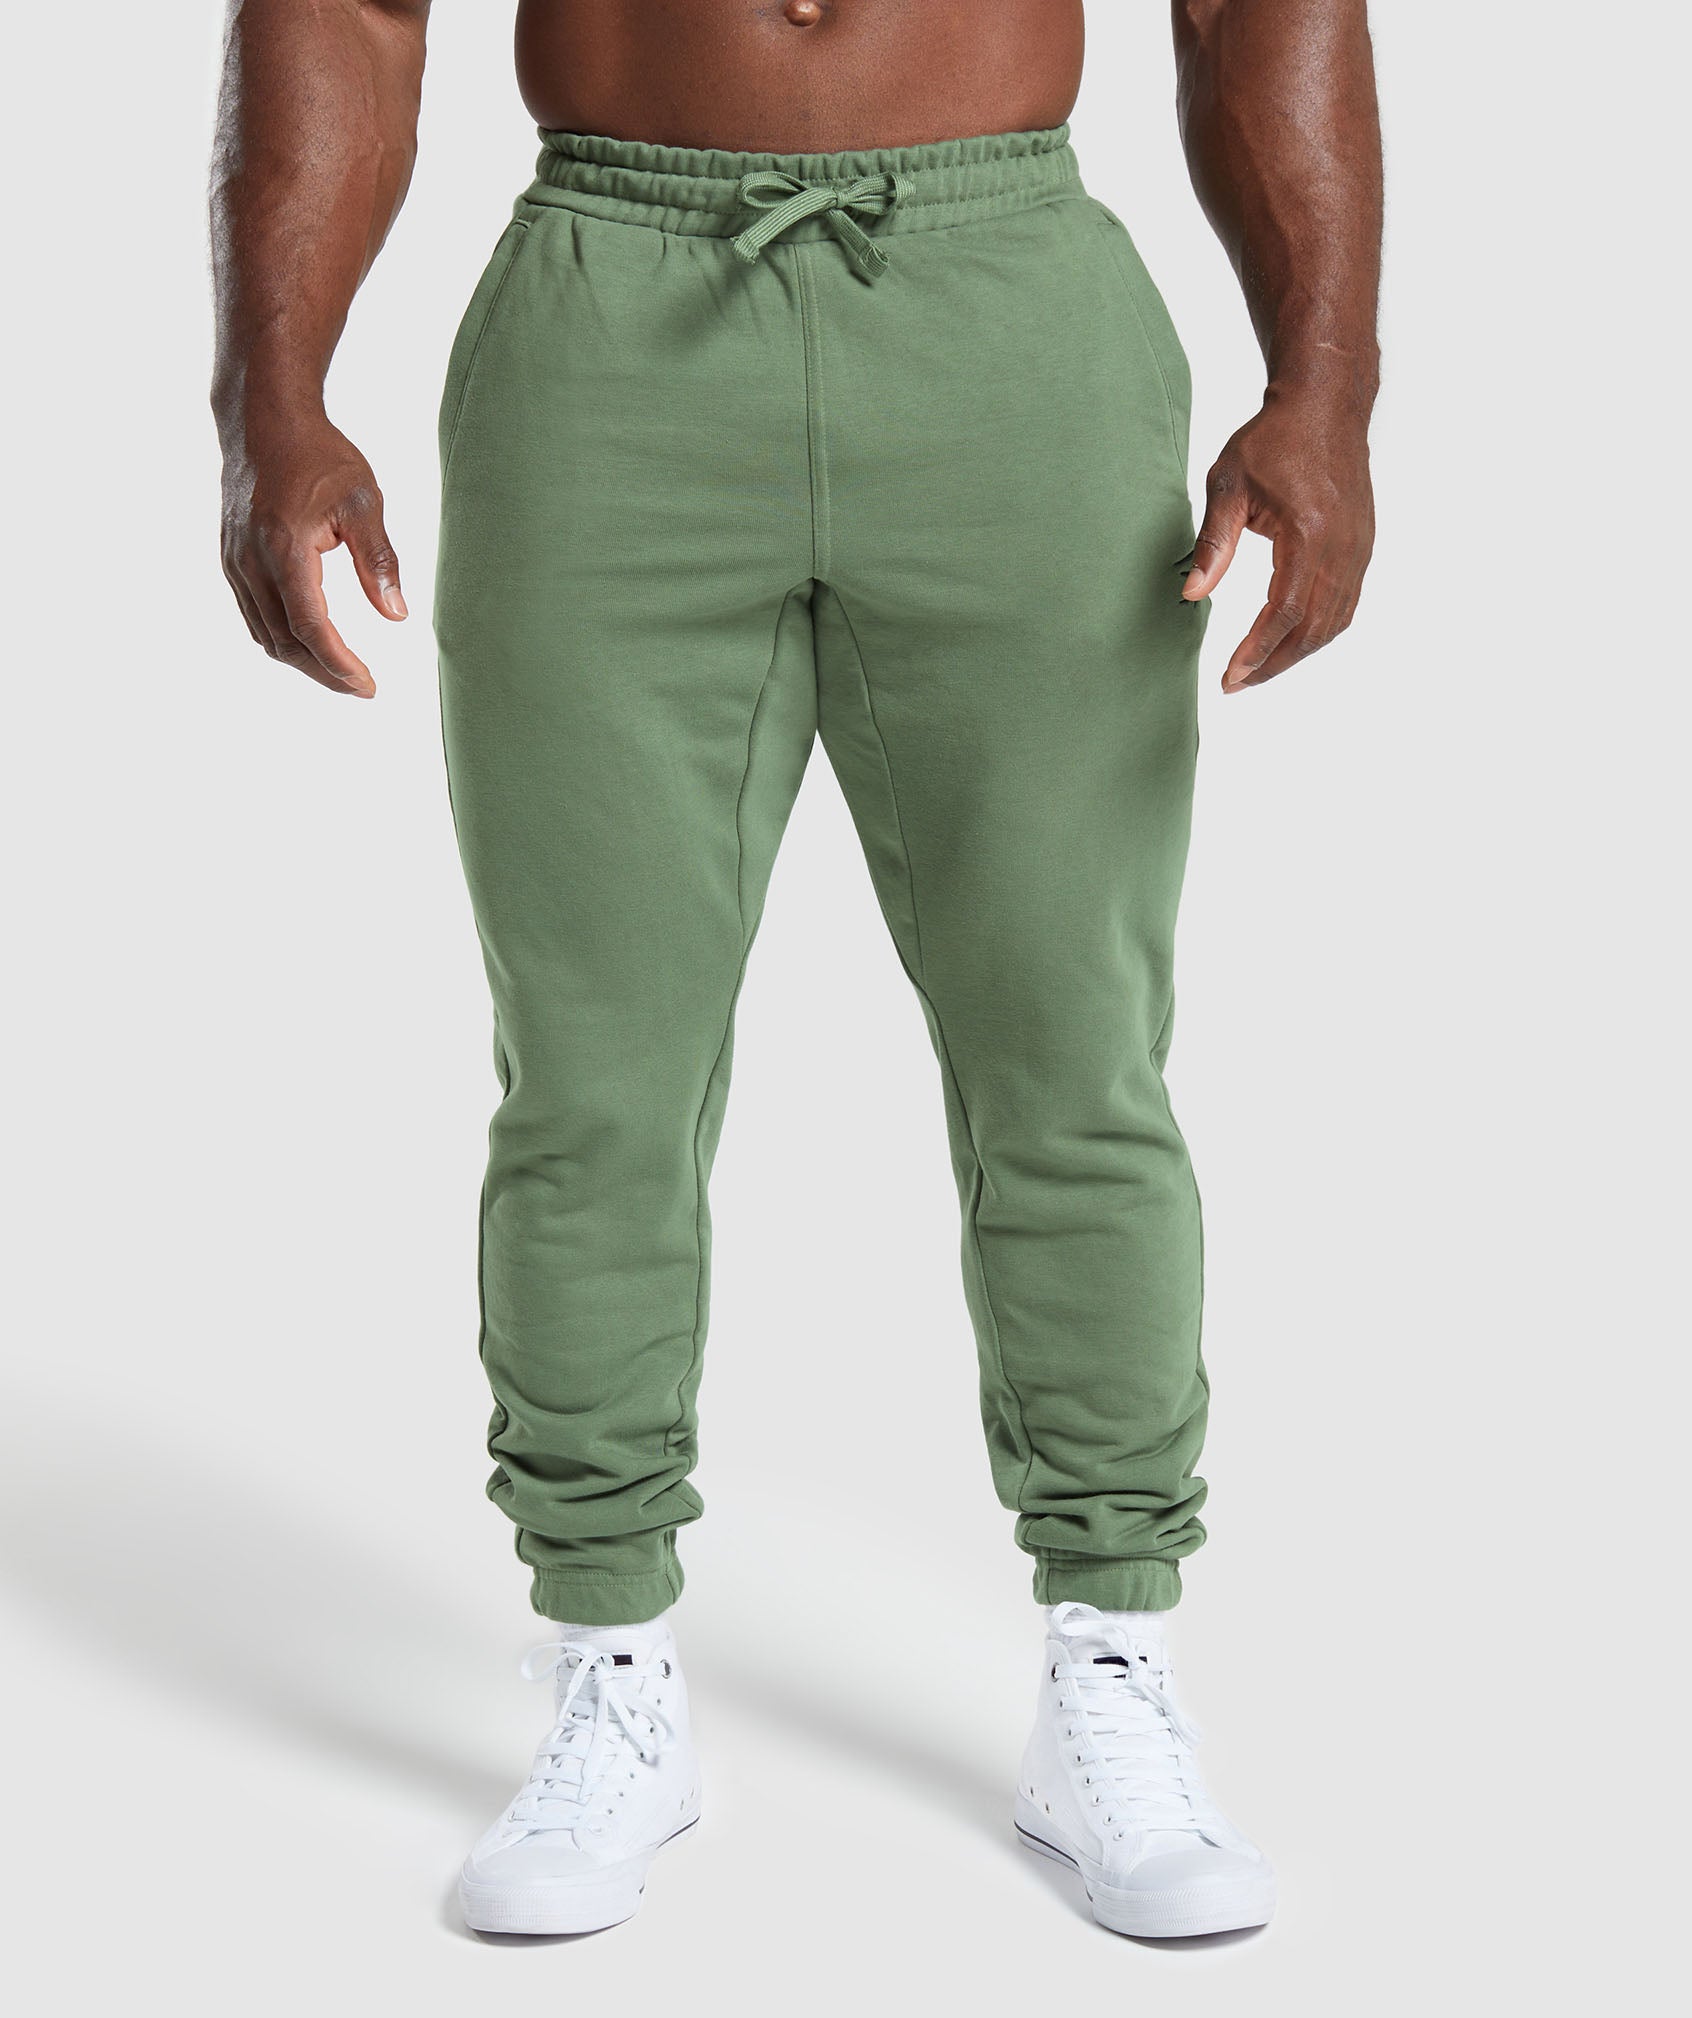 ANYONE KNOW WHERE I CAN COP THESE GREY BAGGY NIKE SWEATS? : r/Pandabuy